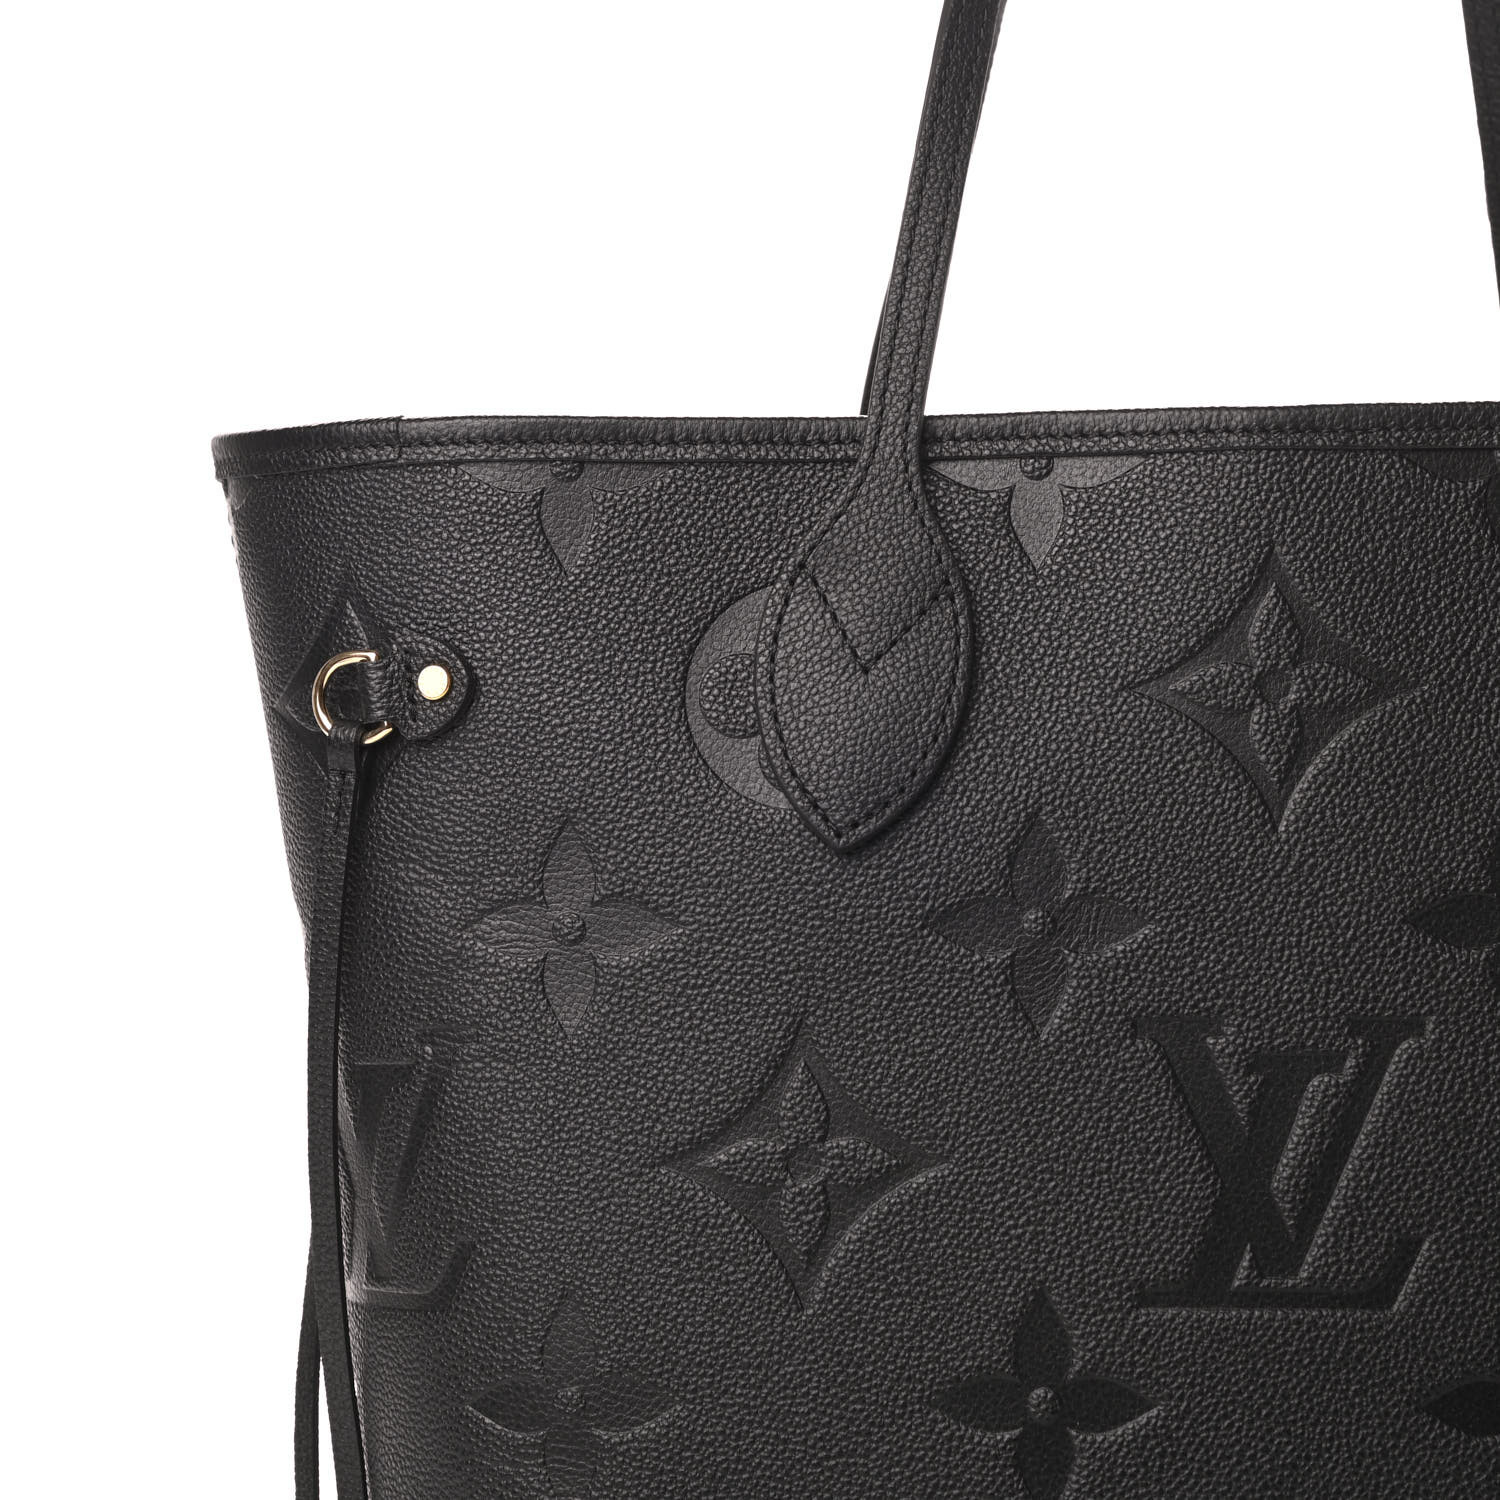 NEW Louis Vuitton Neverfull MM Empreinte Leather (UNBOXING / REVIEW) 